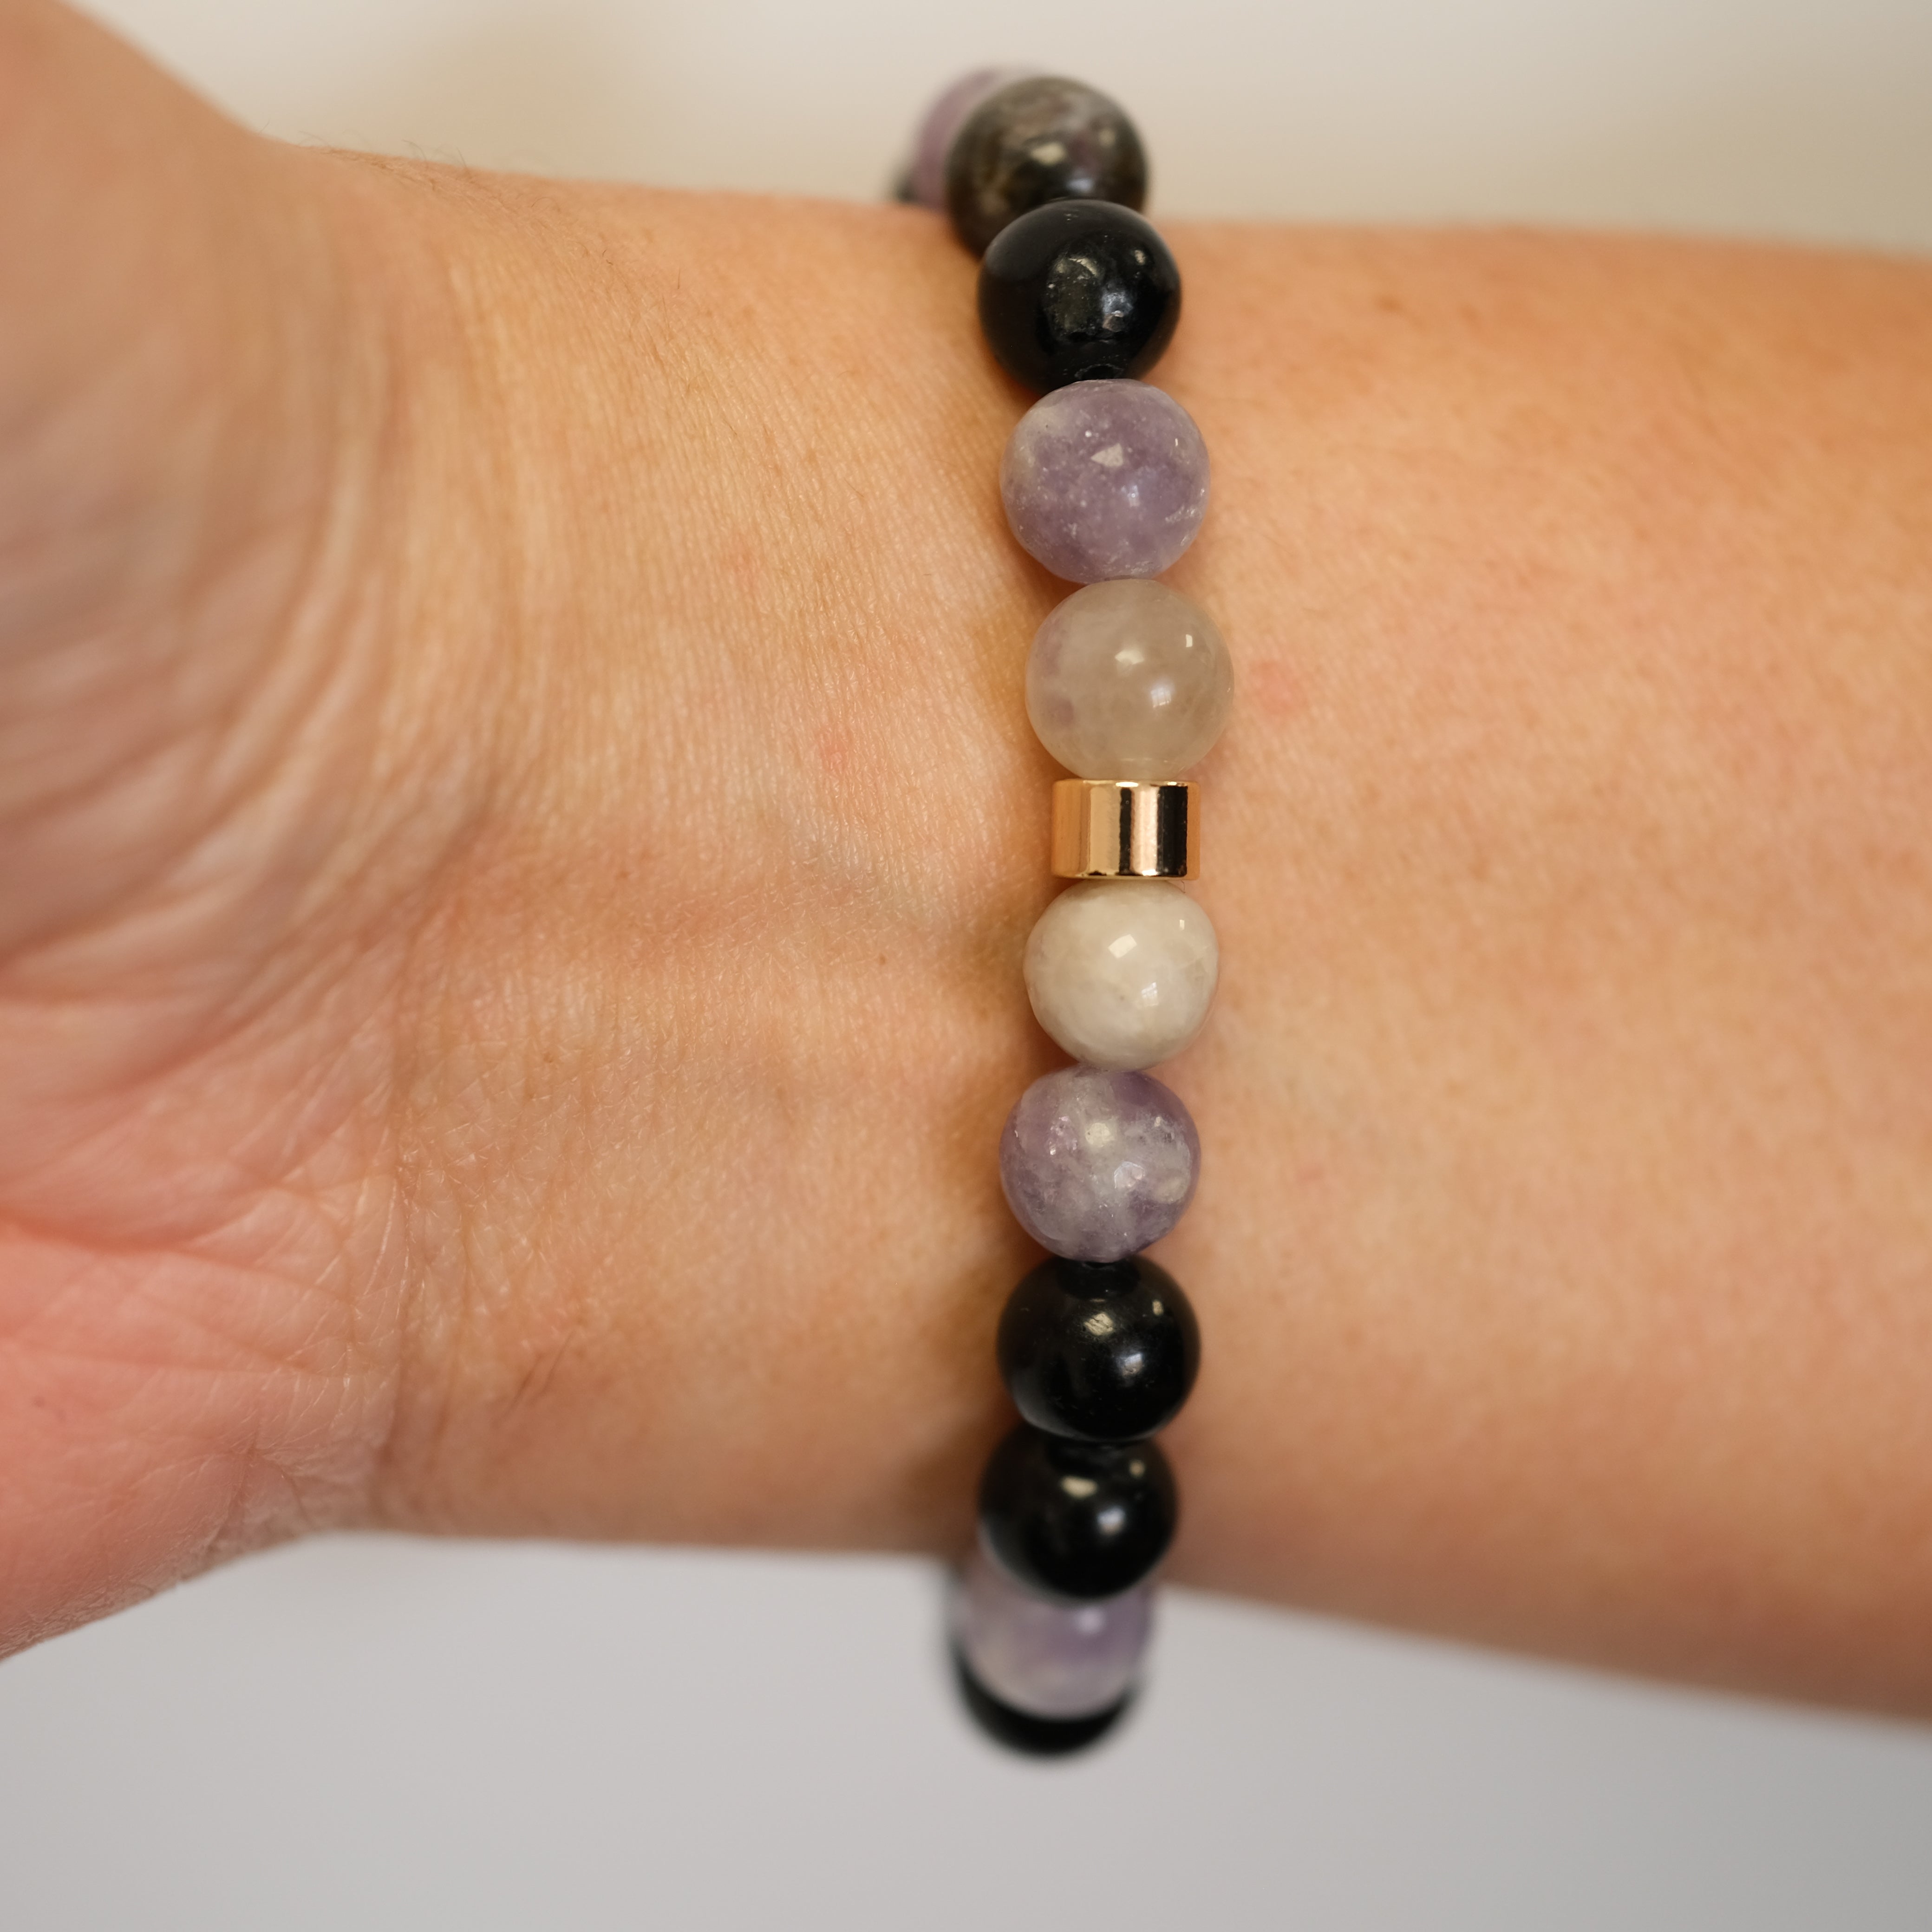 A multi-coloured tourmaline bracelet with gold accessories worn on a model's wrist from behind